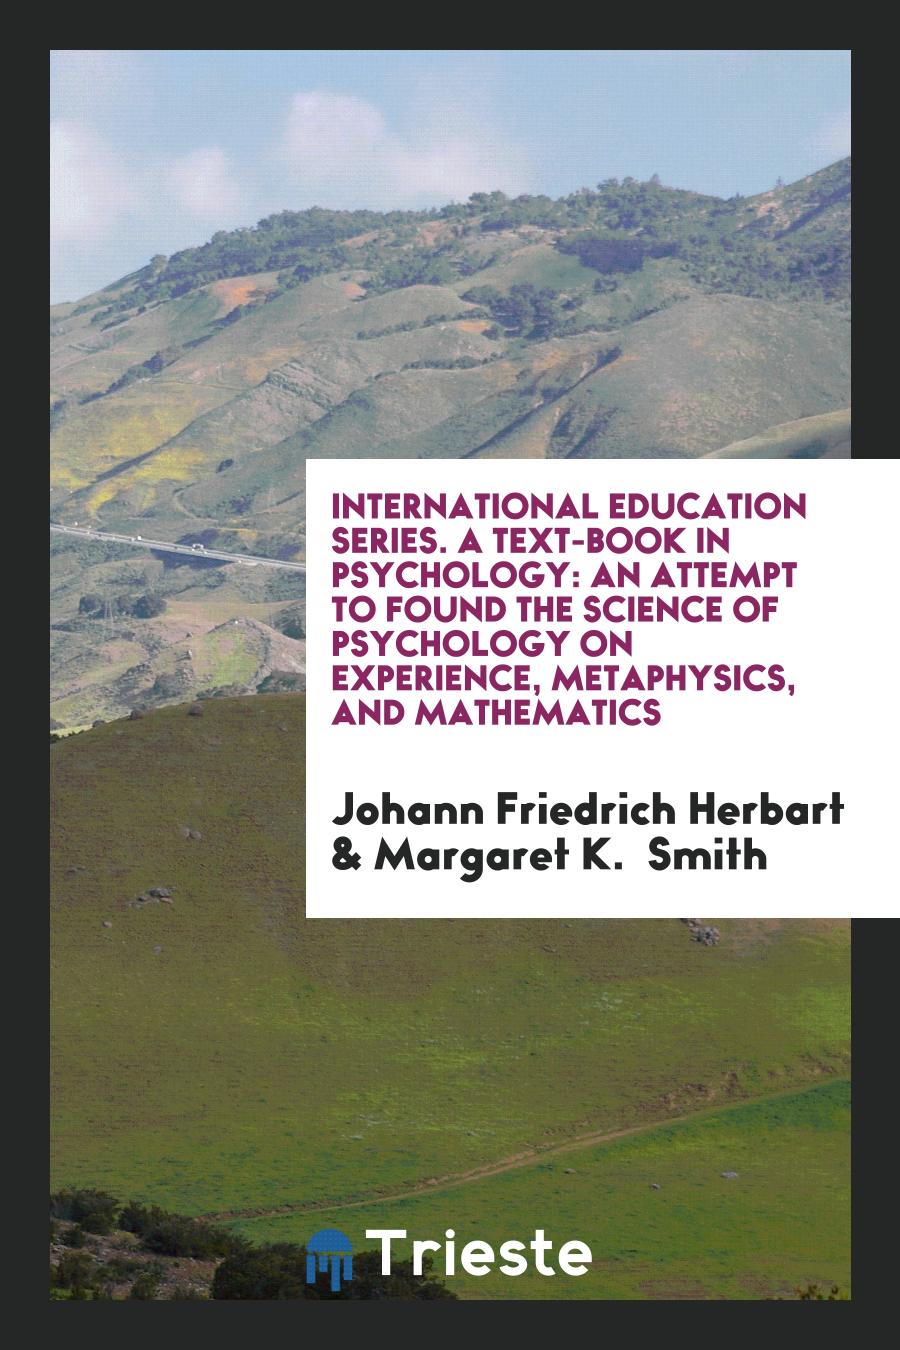 International Education Series. A Text-Book in Psychology: An Attempt to Found the Science of Psychology on Experience, Metaphysics, and Mathematics